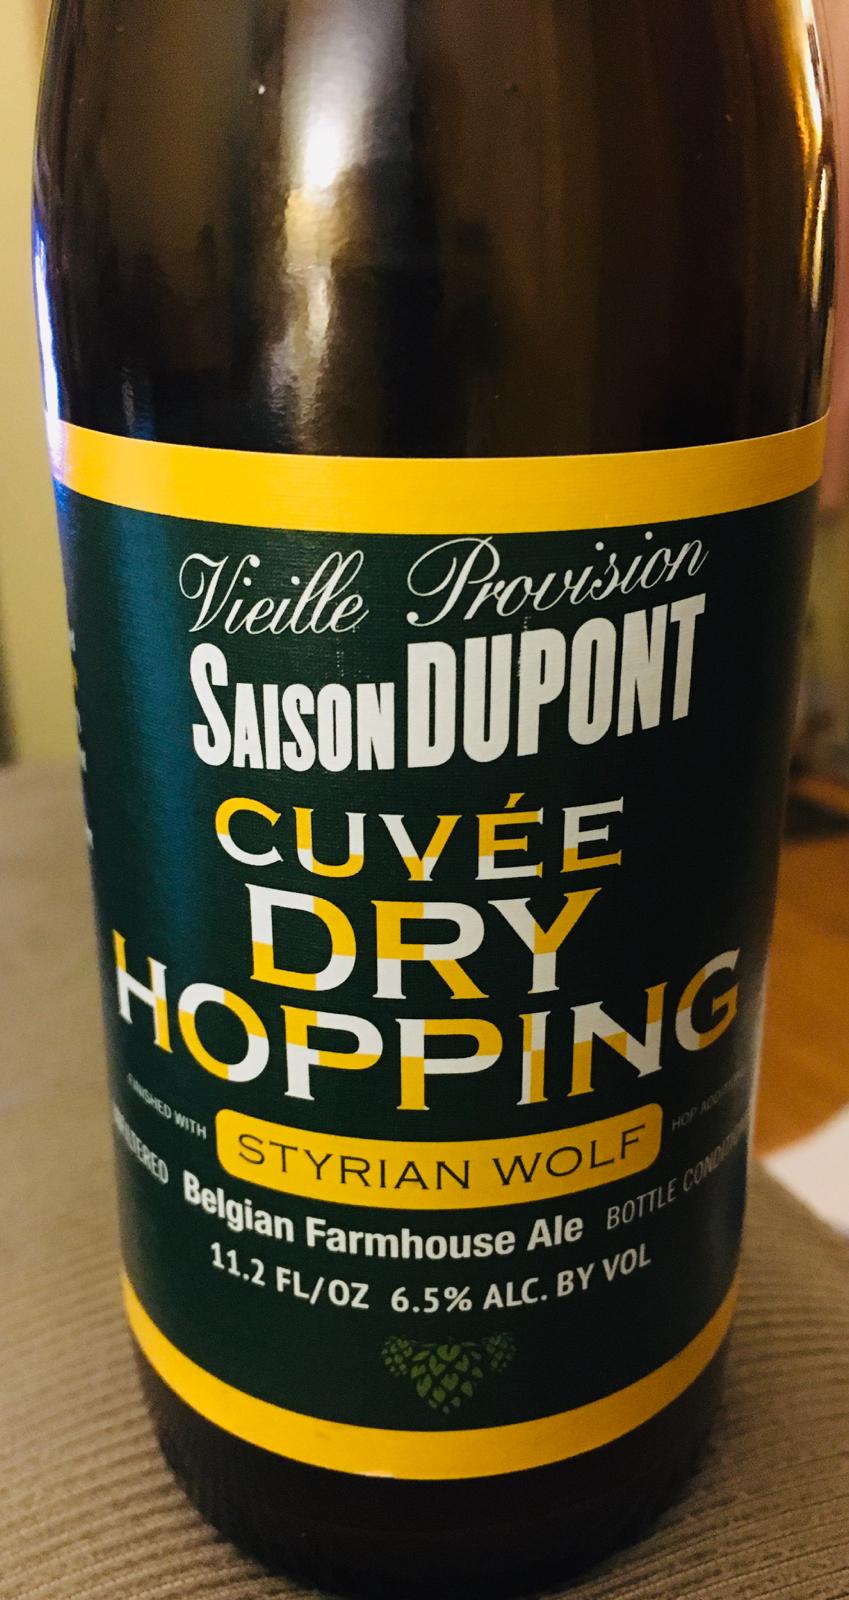 Saison Dupont Cuvée Dry Hopping 2019 (Styrian Wolf)